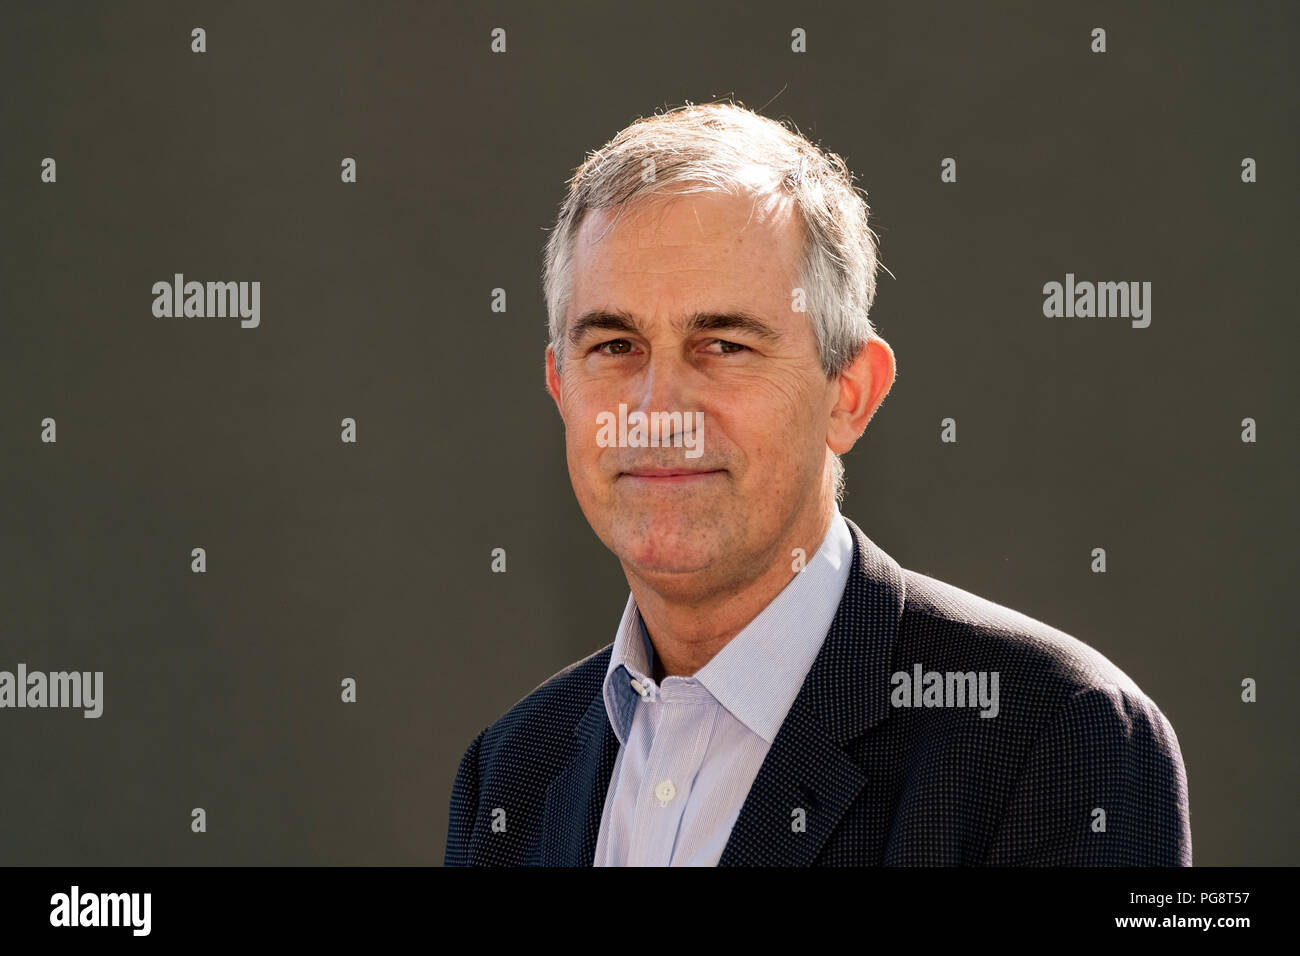 Edinburgh, Scotland, UK. 25 August, 2018. Pictured; Victor Mallet, Financial Times Asia News Editor has closely studied the iconic waterway and his latest research shows an environmental crisis of vast proportions. Credit: Iain Masterton/Alamy Live News Stock Photo